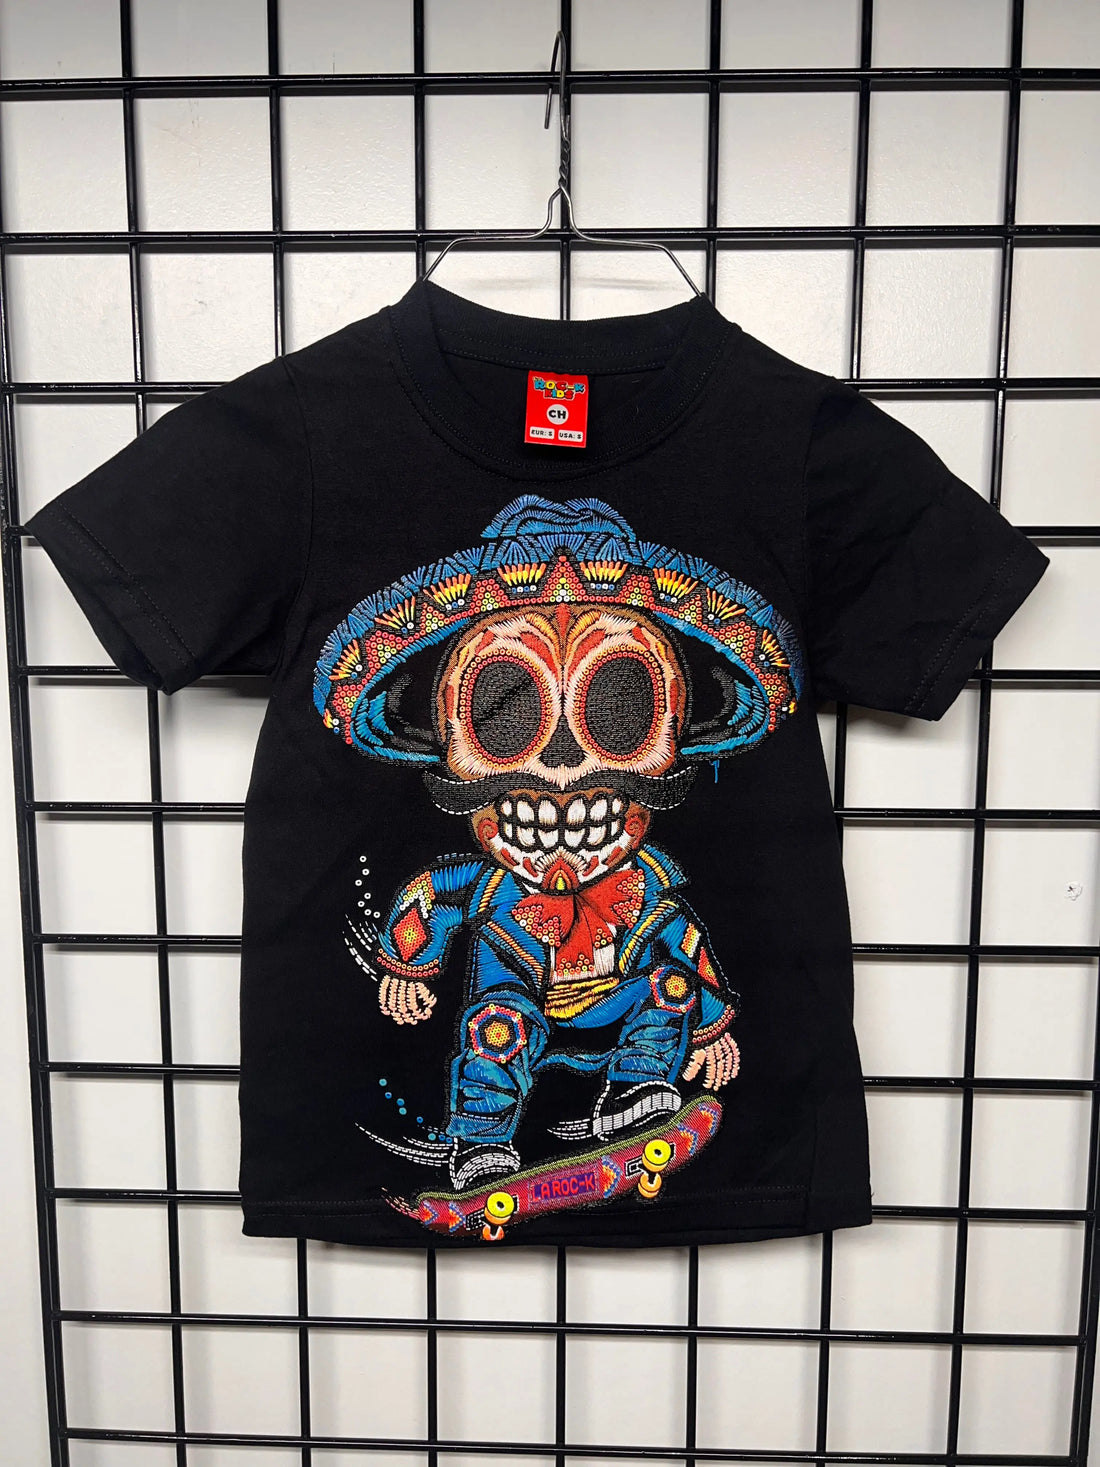 Embrace-Mexican-Culture-with-Vibrant-Screen-Printed-T-Shirts Alebrijes T-shits